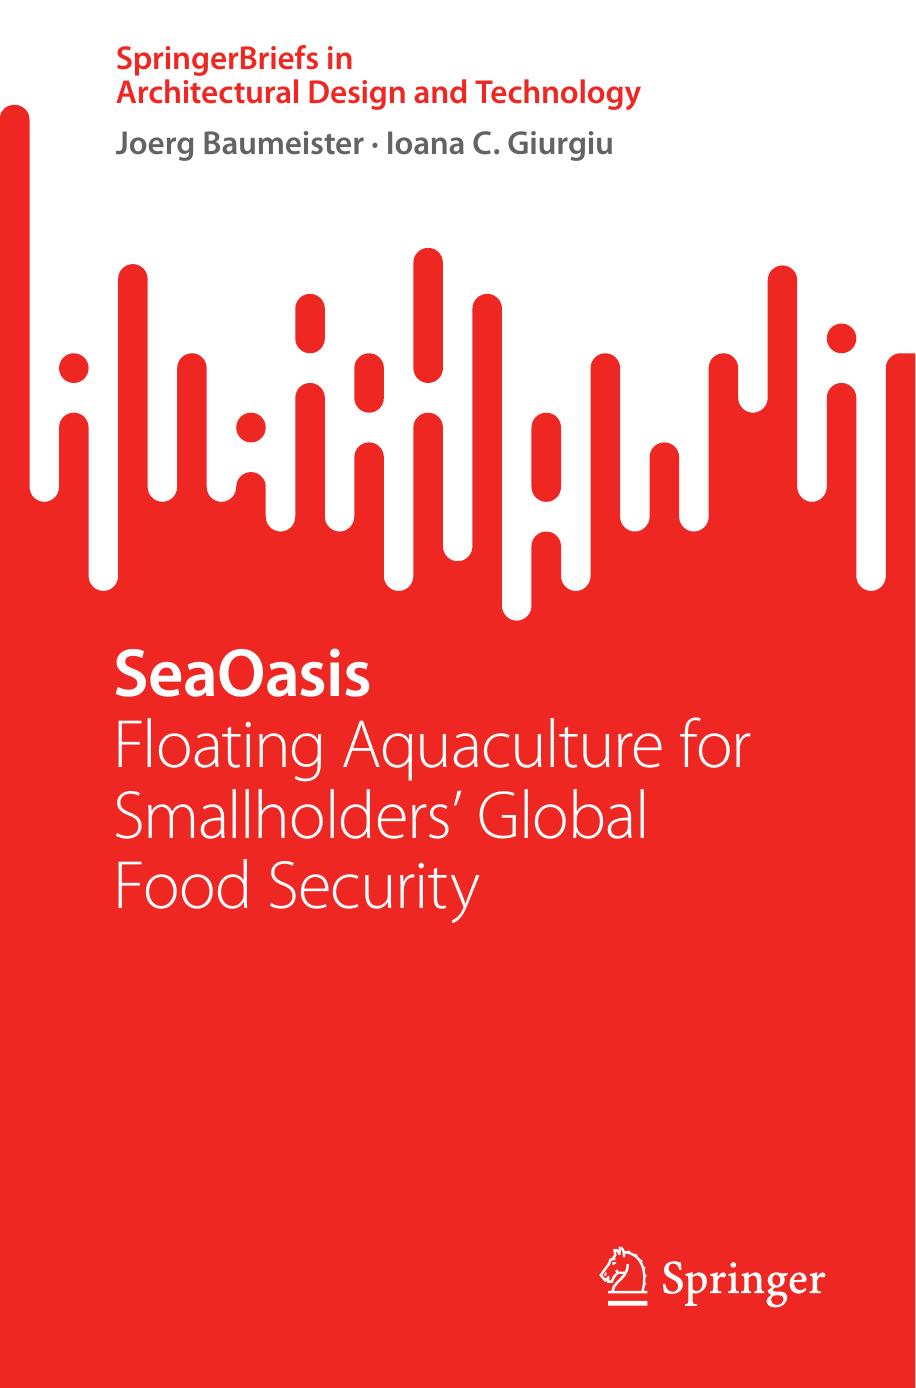 SeaOasis  Floating Aquaculture for Smallholders' Global Food Security-Springer (2022)